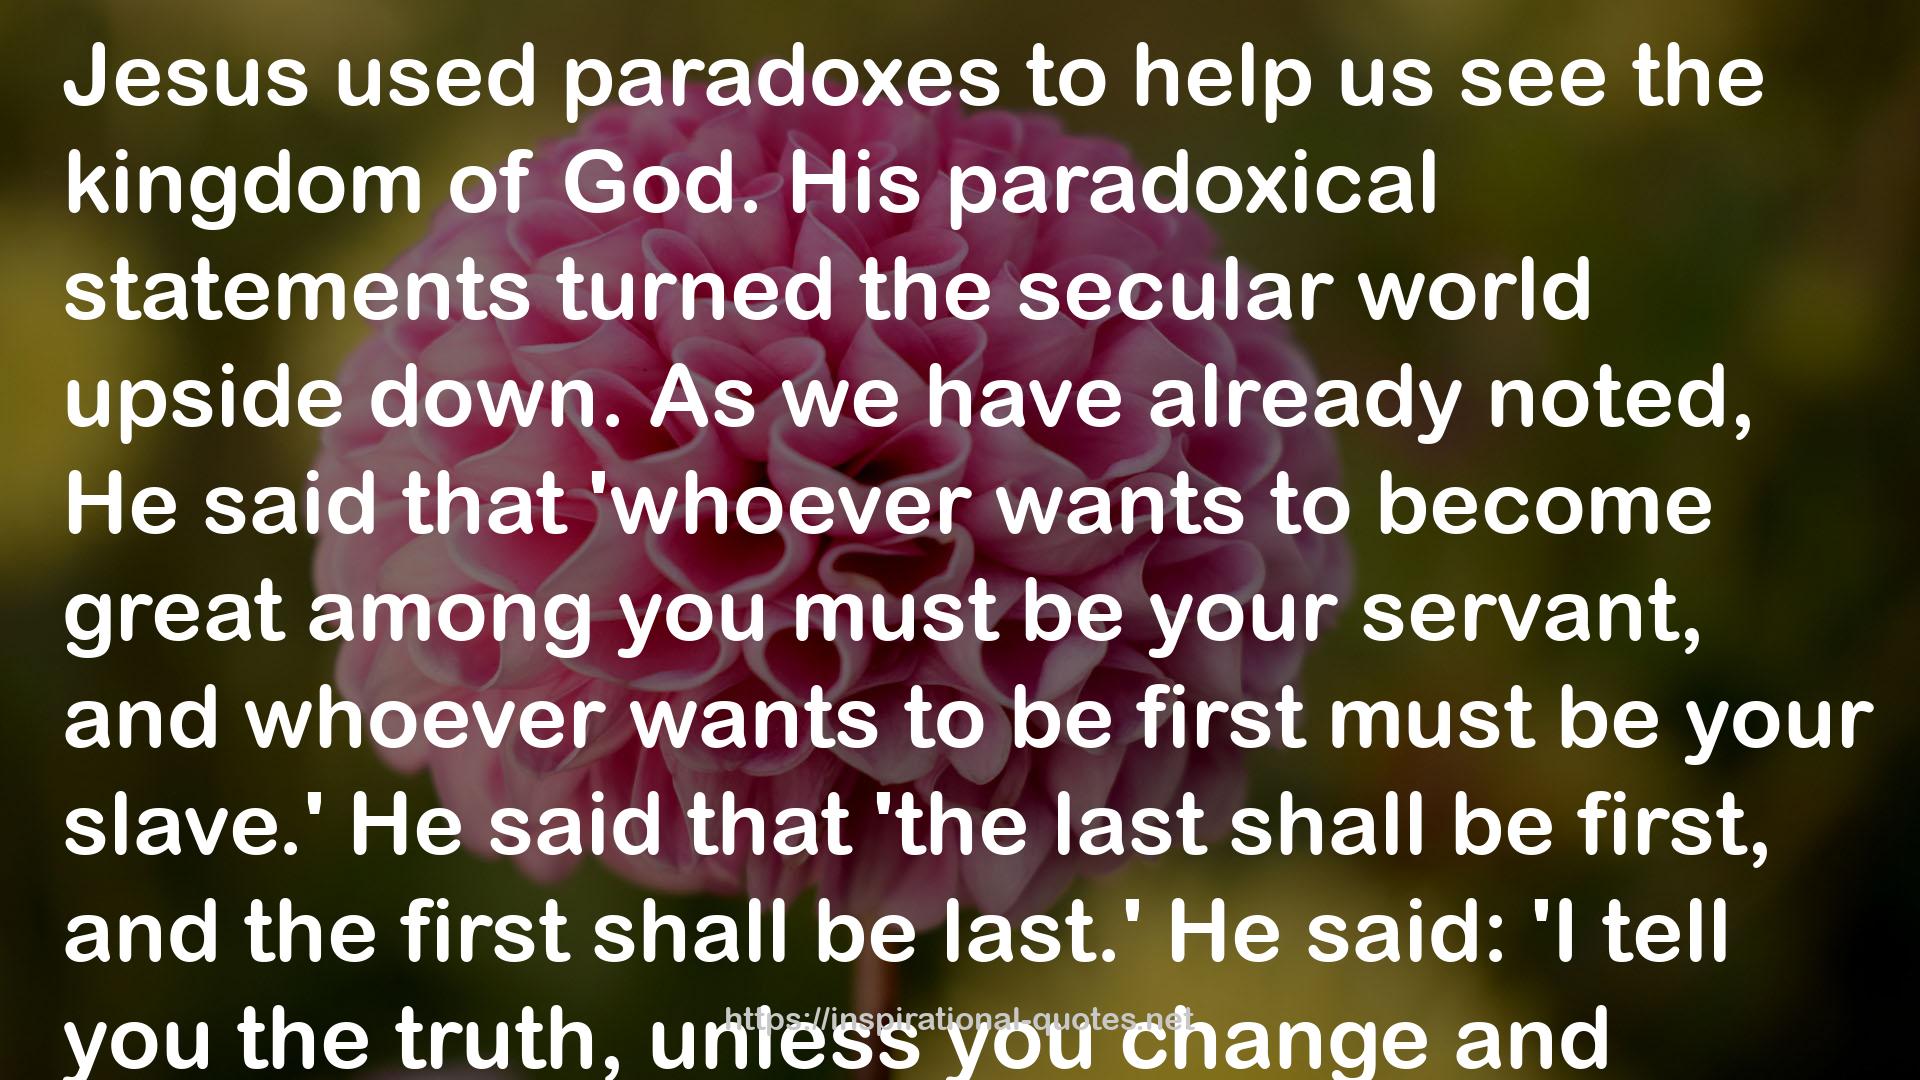 Jesus Did It Anyway: The Paradoxical Commandments for Christians QUOTES